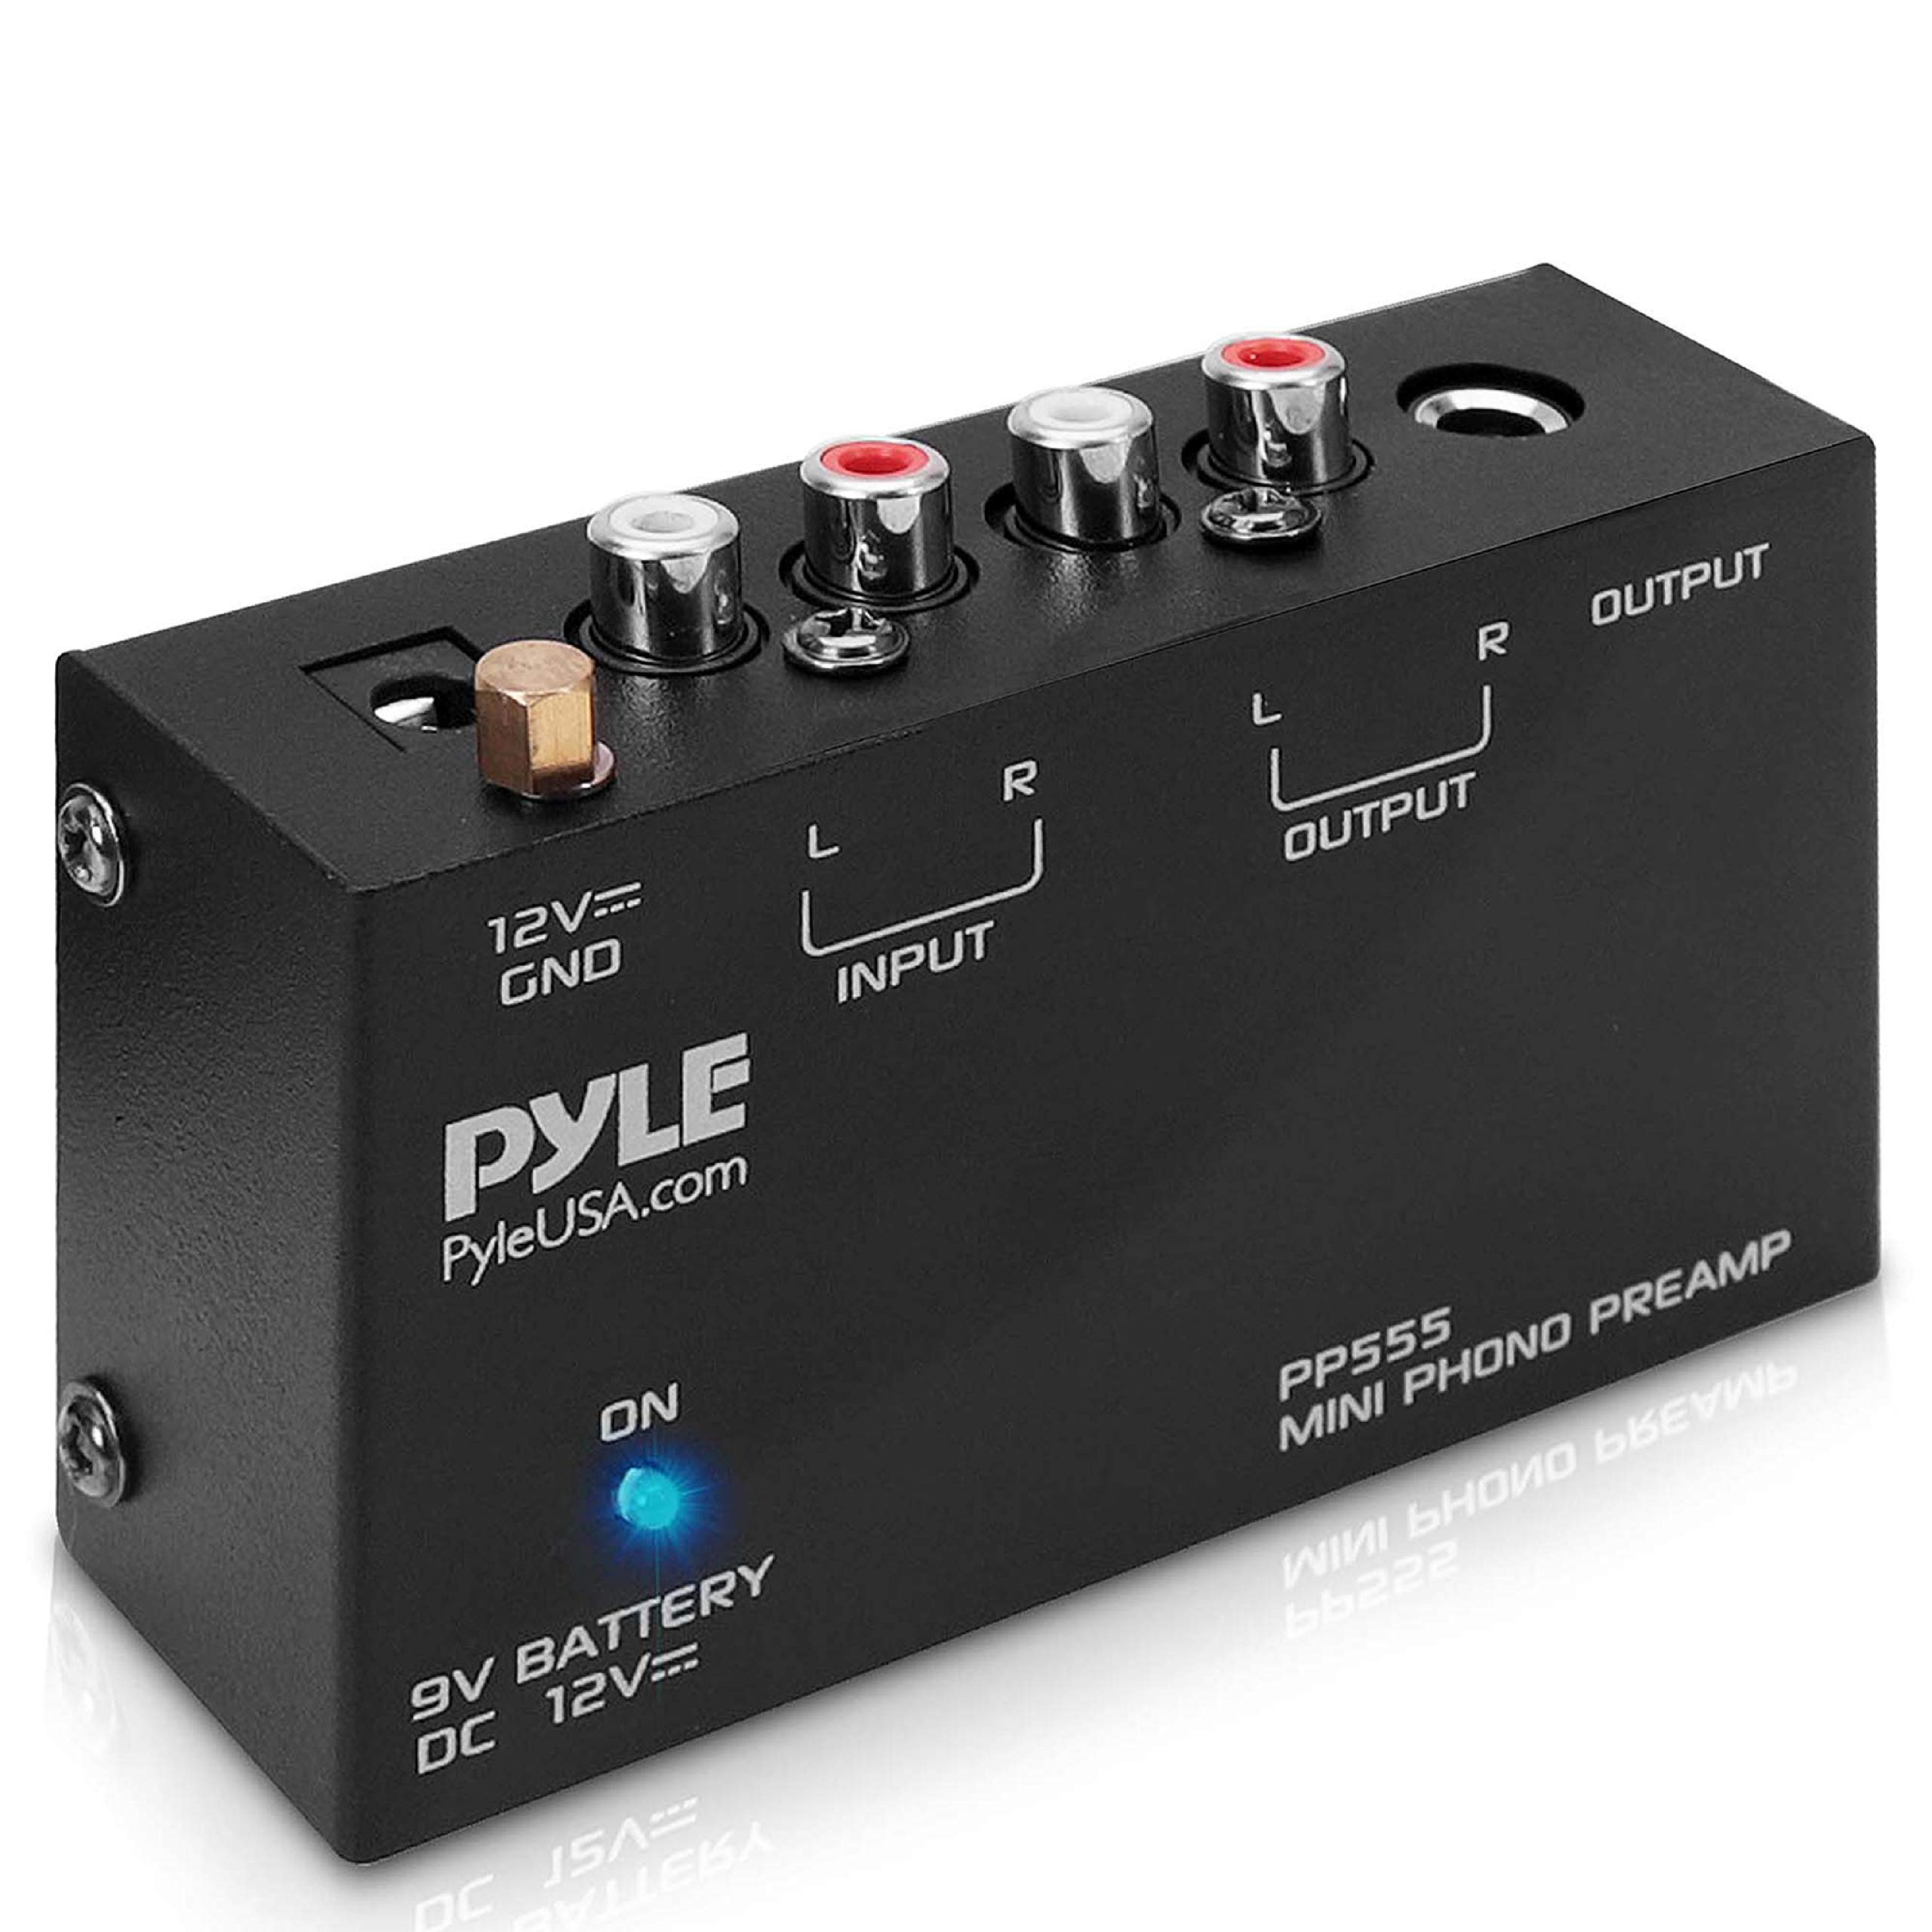 Pyle Phono Turntable Preamp - Mini Electronic Audio Stereo Phonograph Preamplifier with 9V Battery Compartment, Separate DC 12V Power Adapter, RCA Input, RCA Output & Low Noise Operation (PP555) BLACK